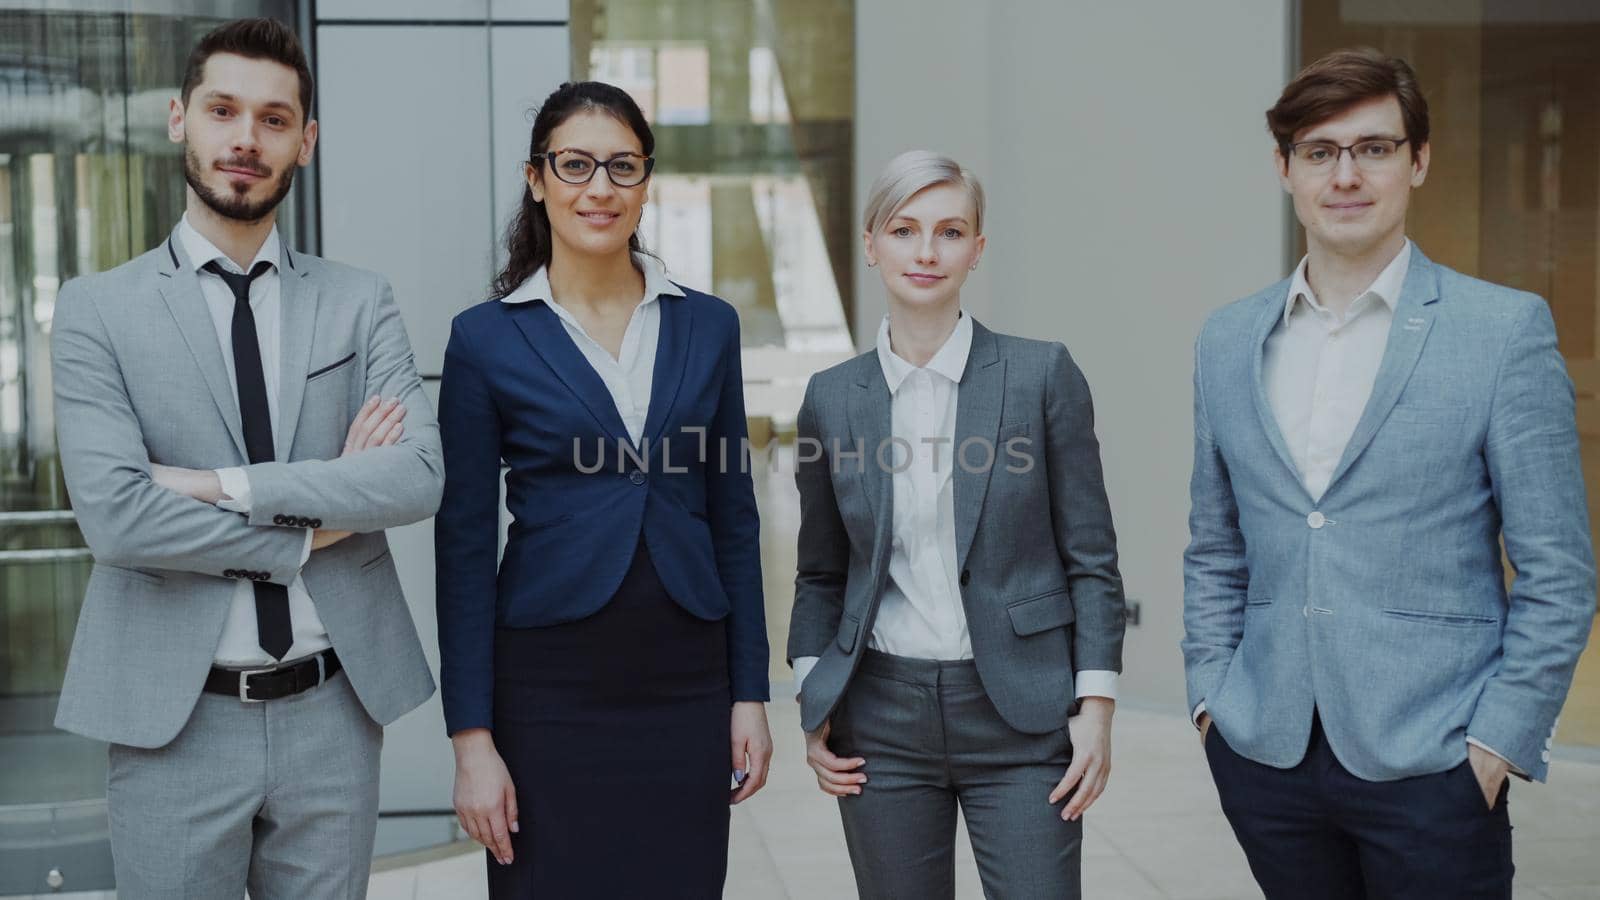 Portrait of group of business people smiling in modern office indoors. Team of businessmen and businesswomen standing together